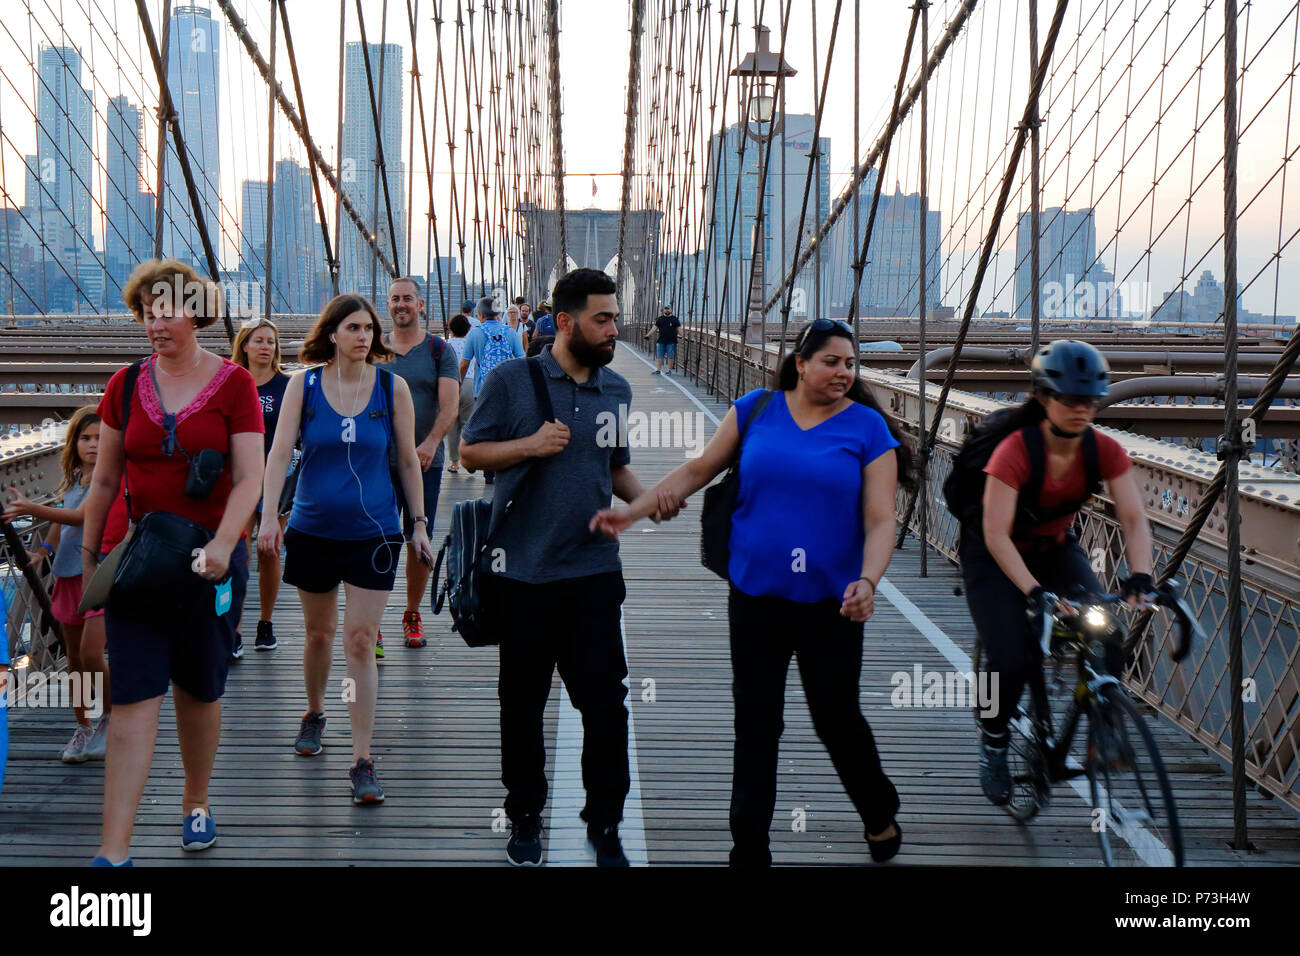 Pedestrians, and cyclists avoid conflict on the Brooklyn Bridge foot path over the East River in New York, NY. Stock Photo